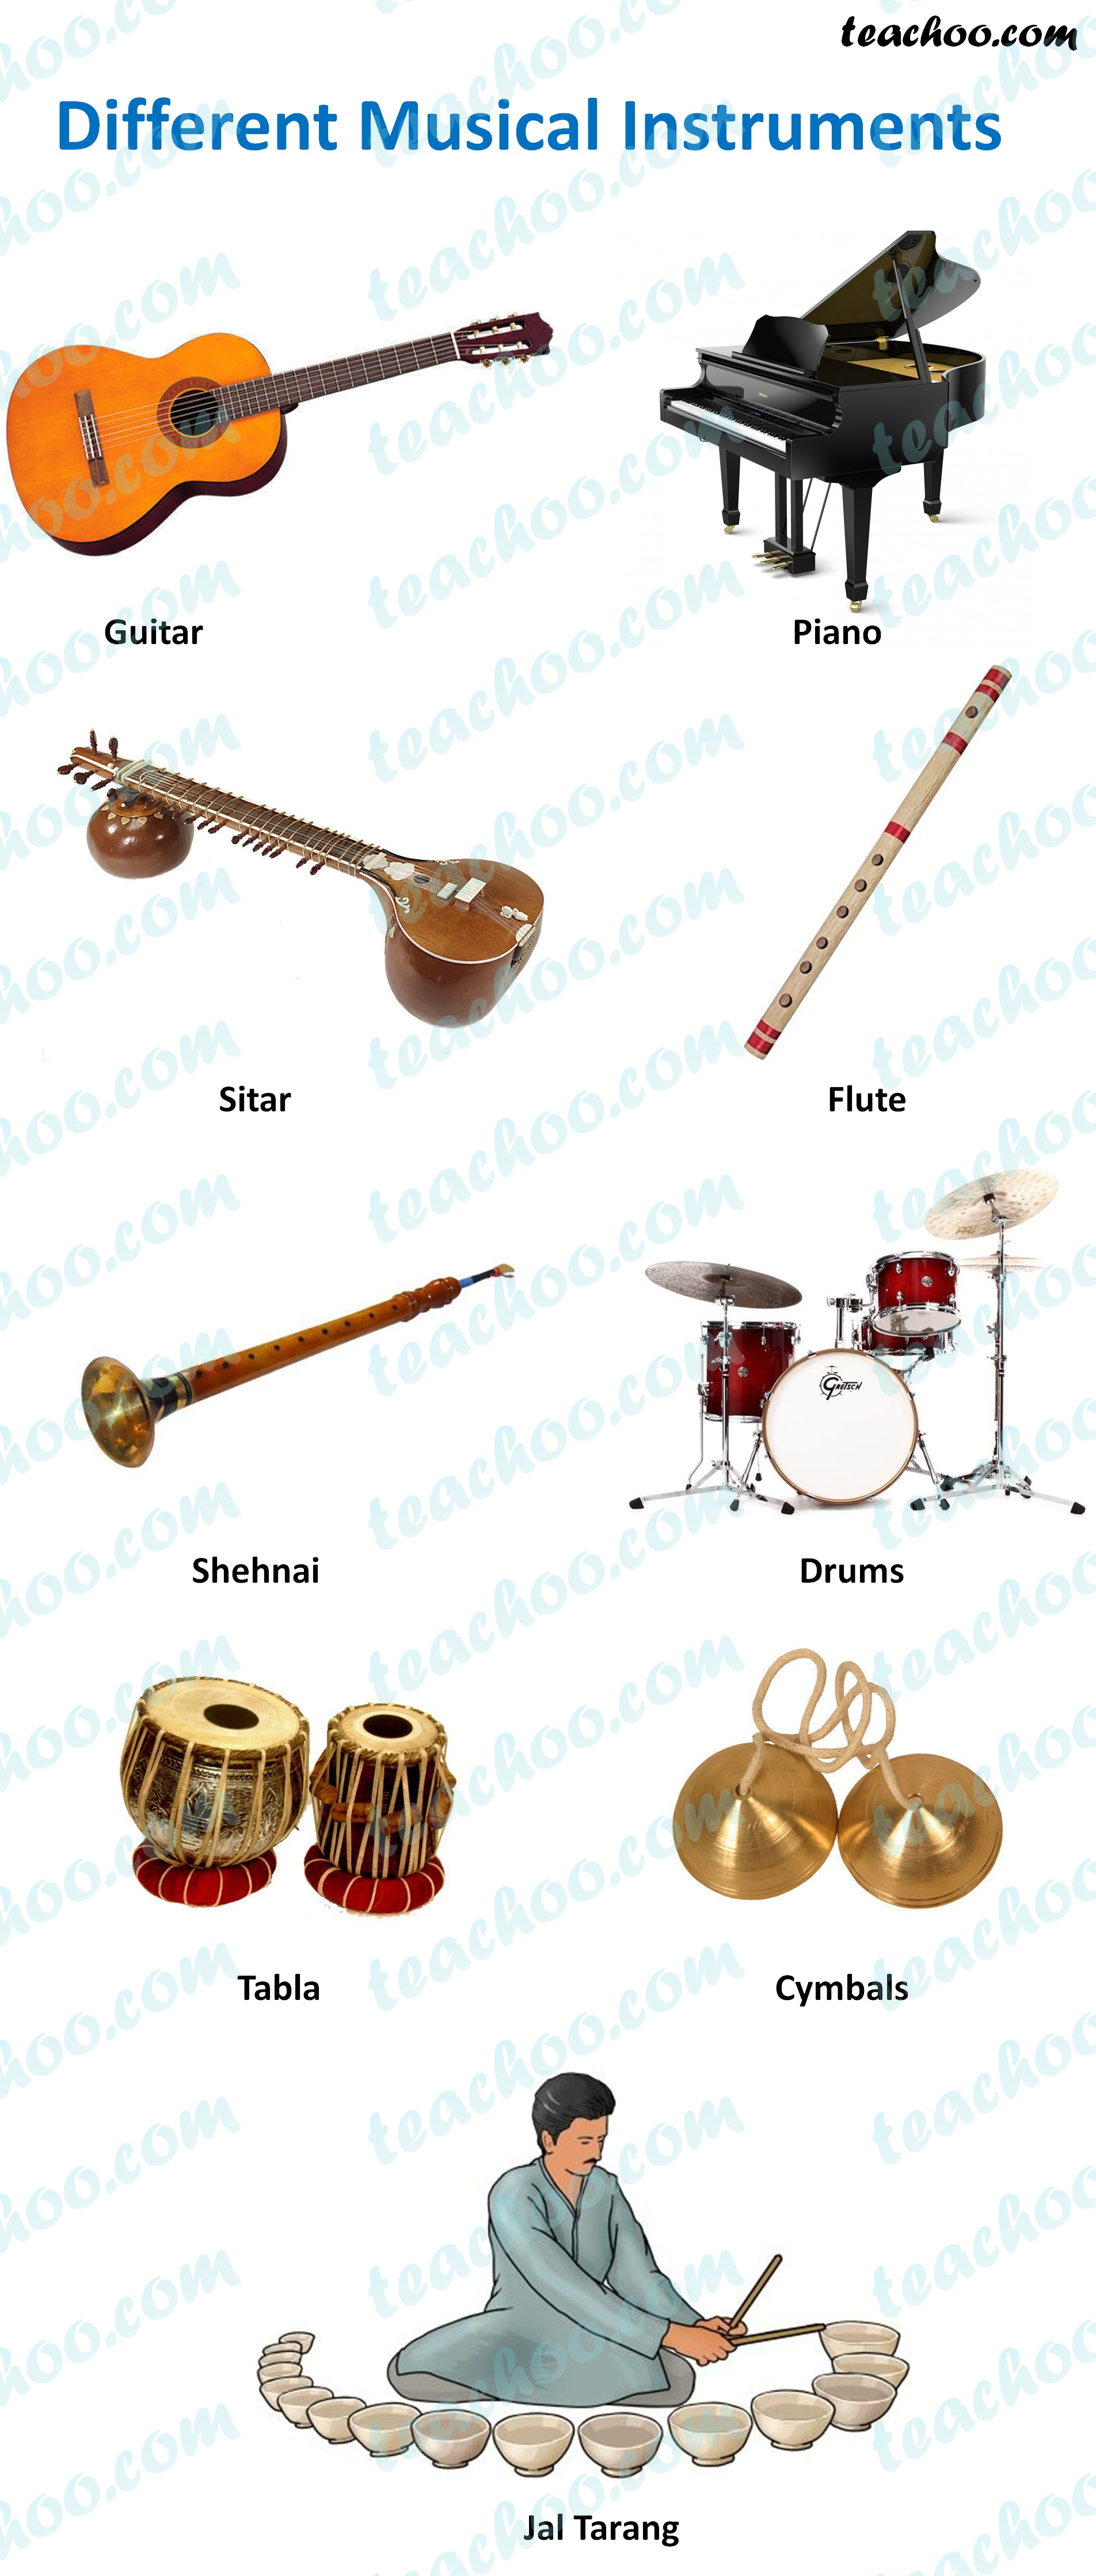 essay musical instruments learn